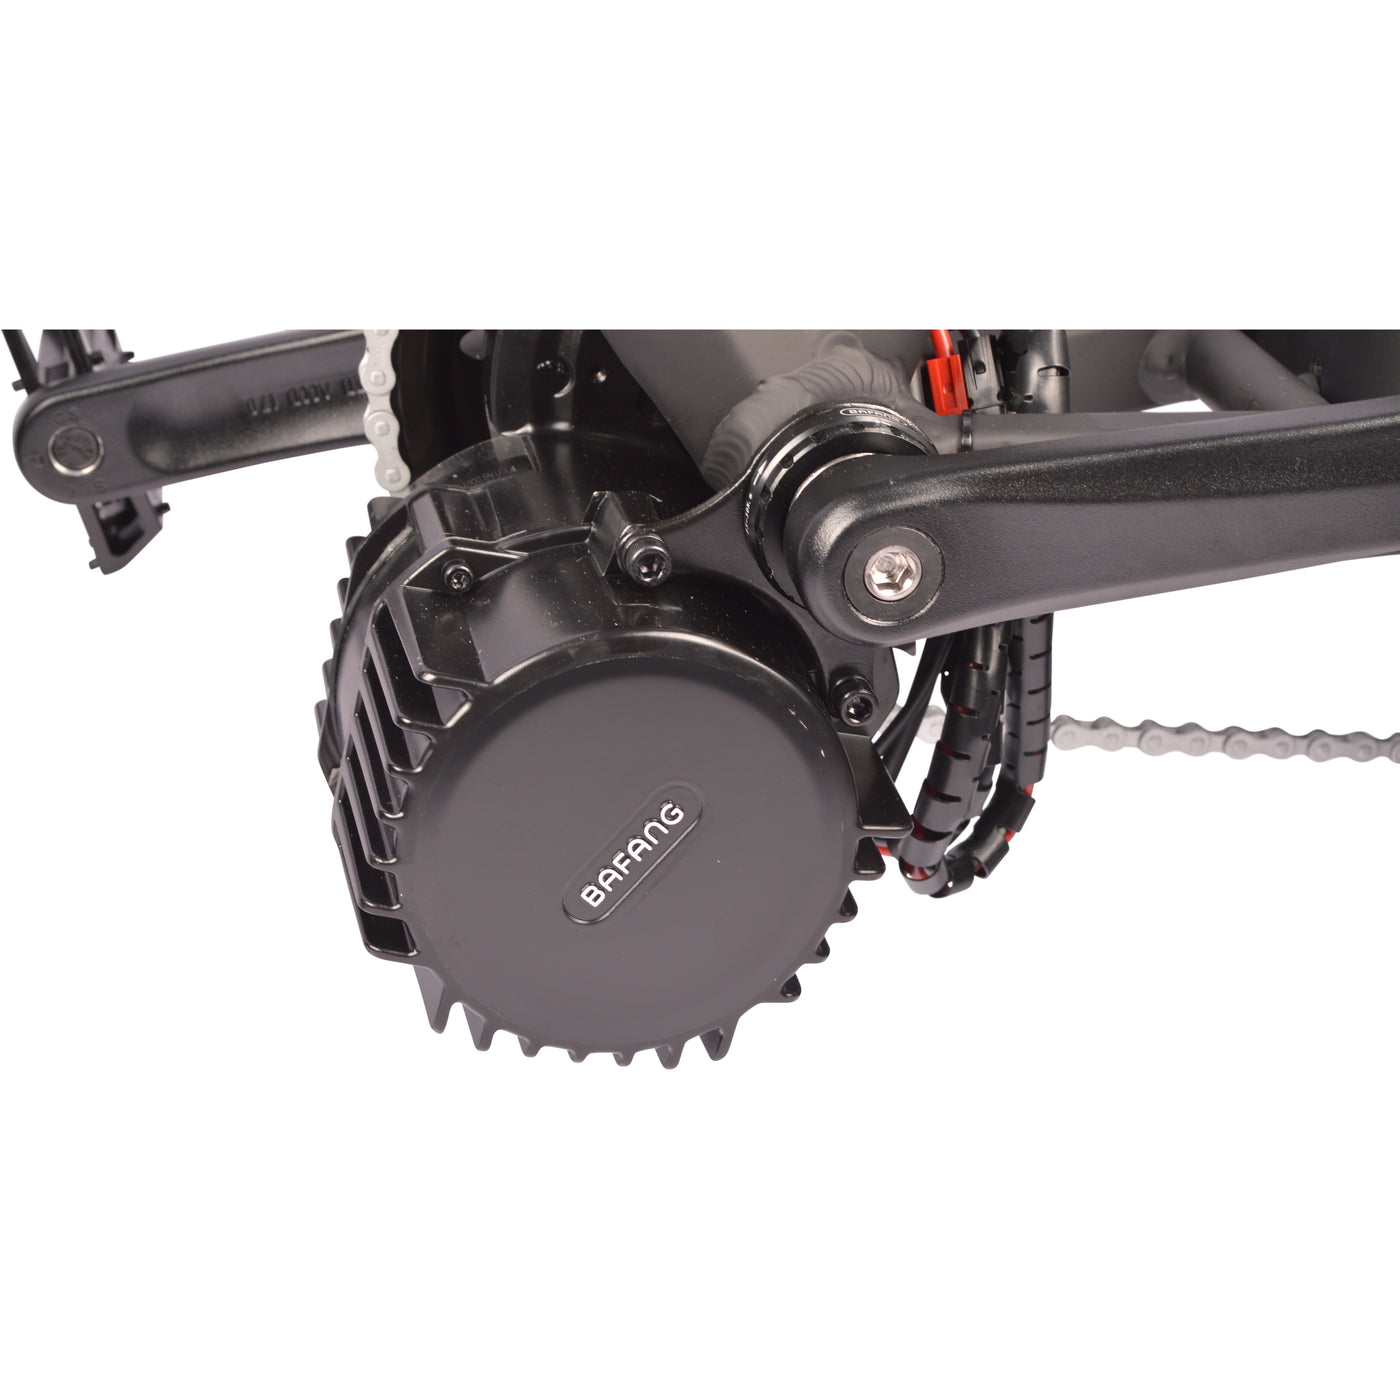 DJ Mid Drive Fat Bike, equipped with a powerful 750W 48V Bafang mid drive motor